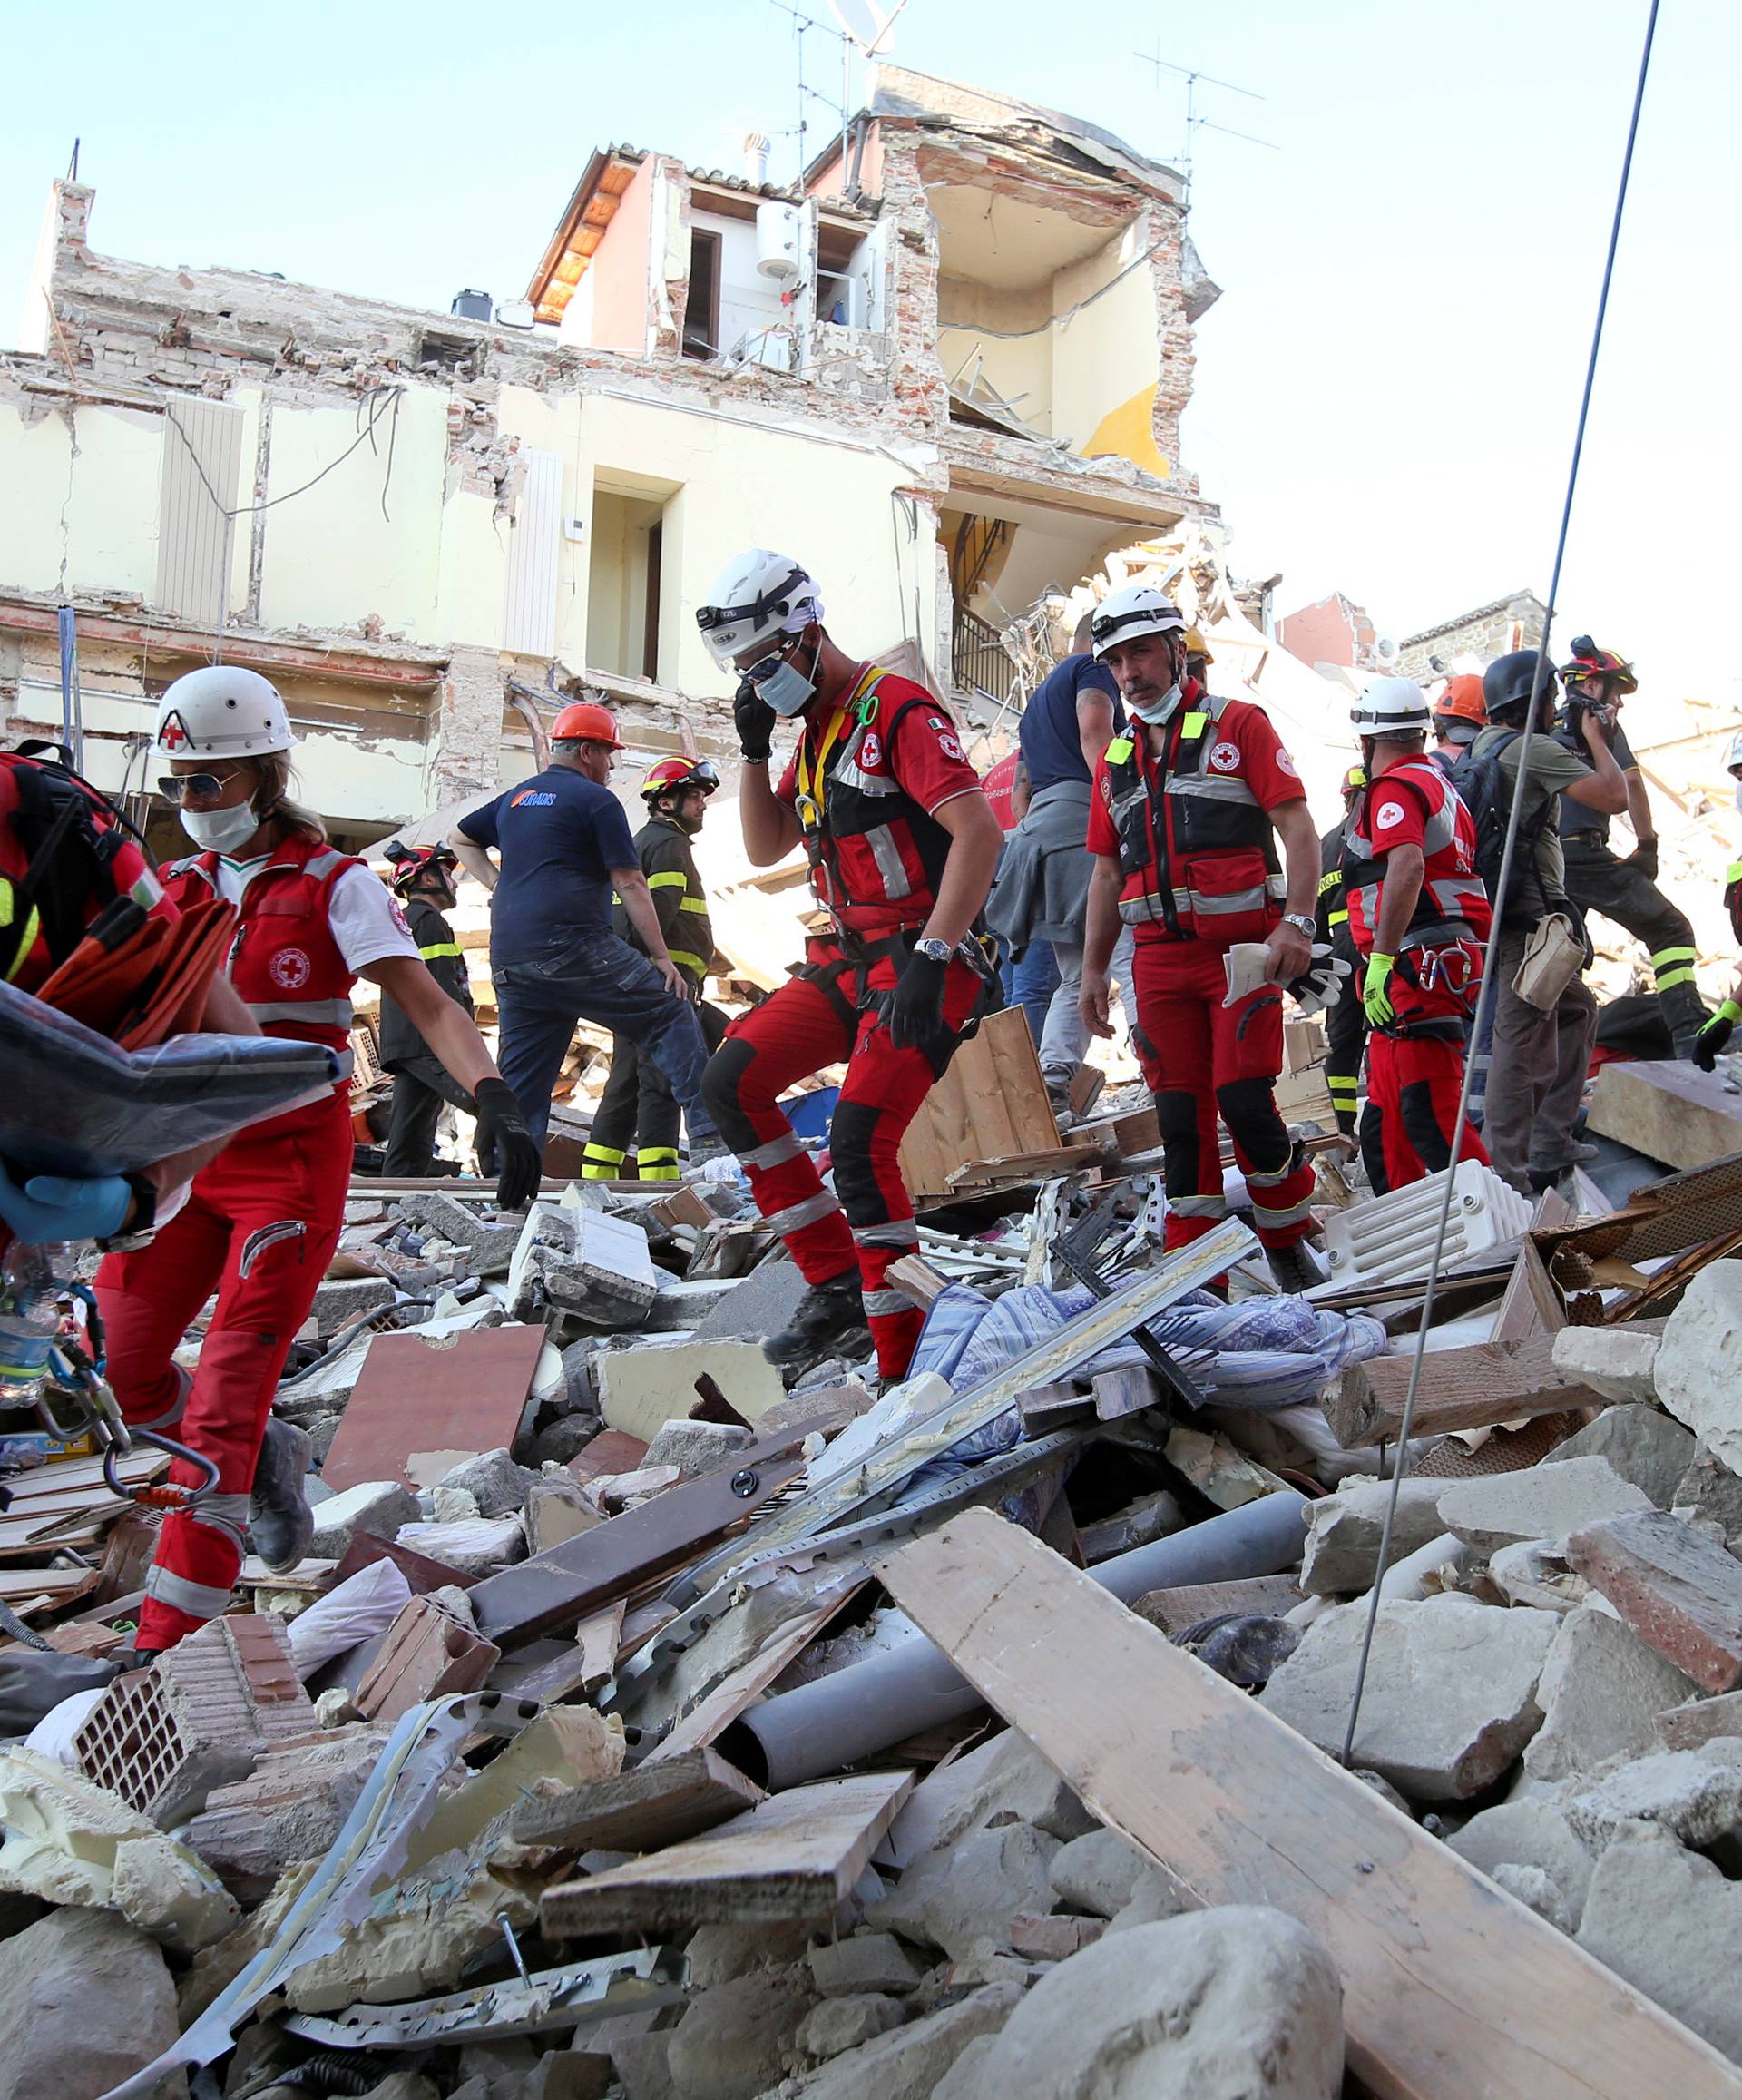 Rescuers walk through rubble following the earthquake in Amatrice